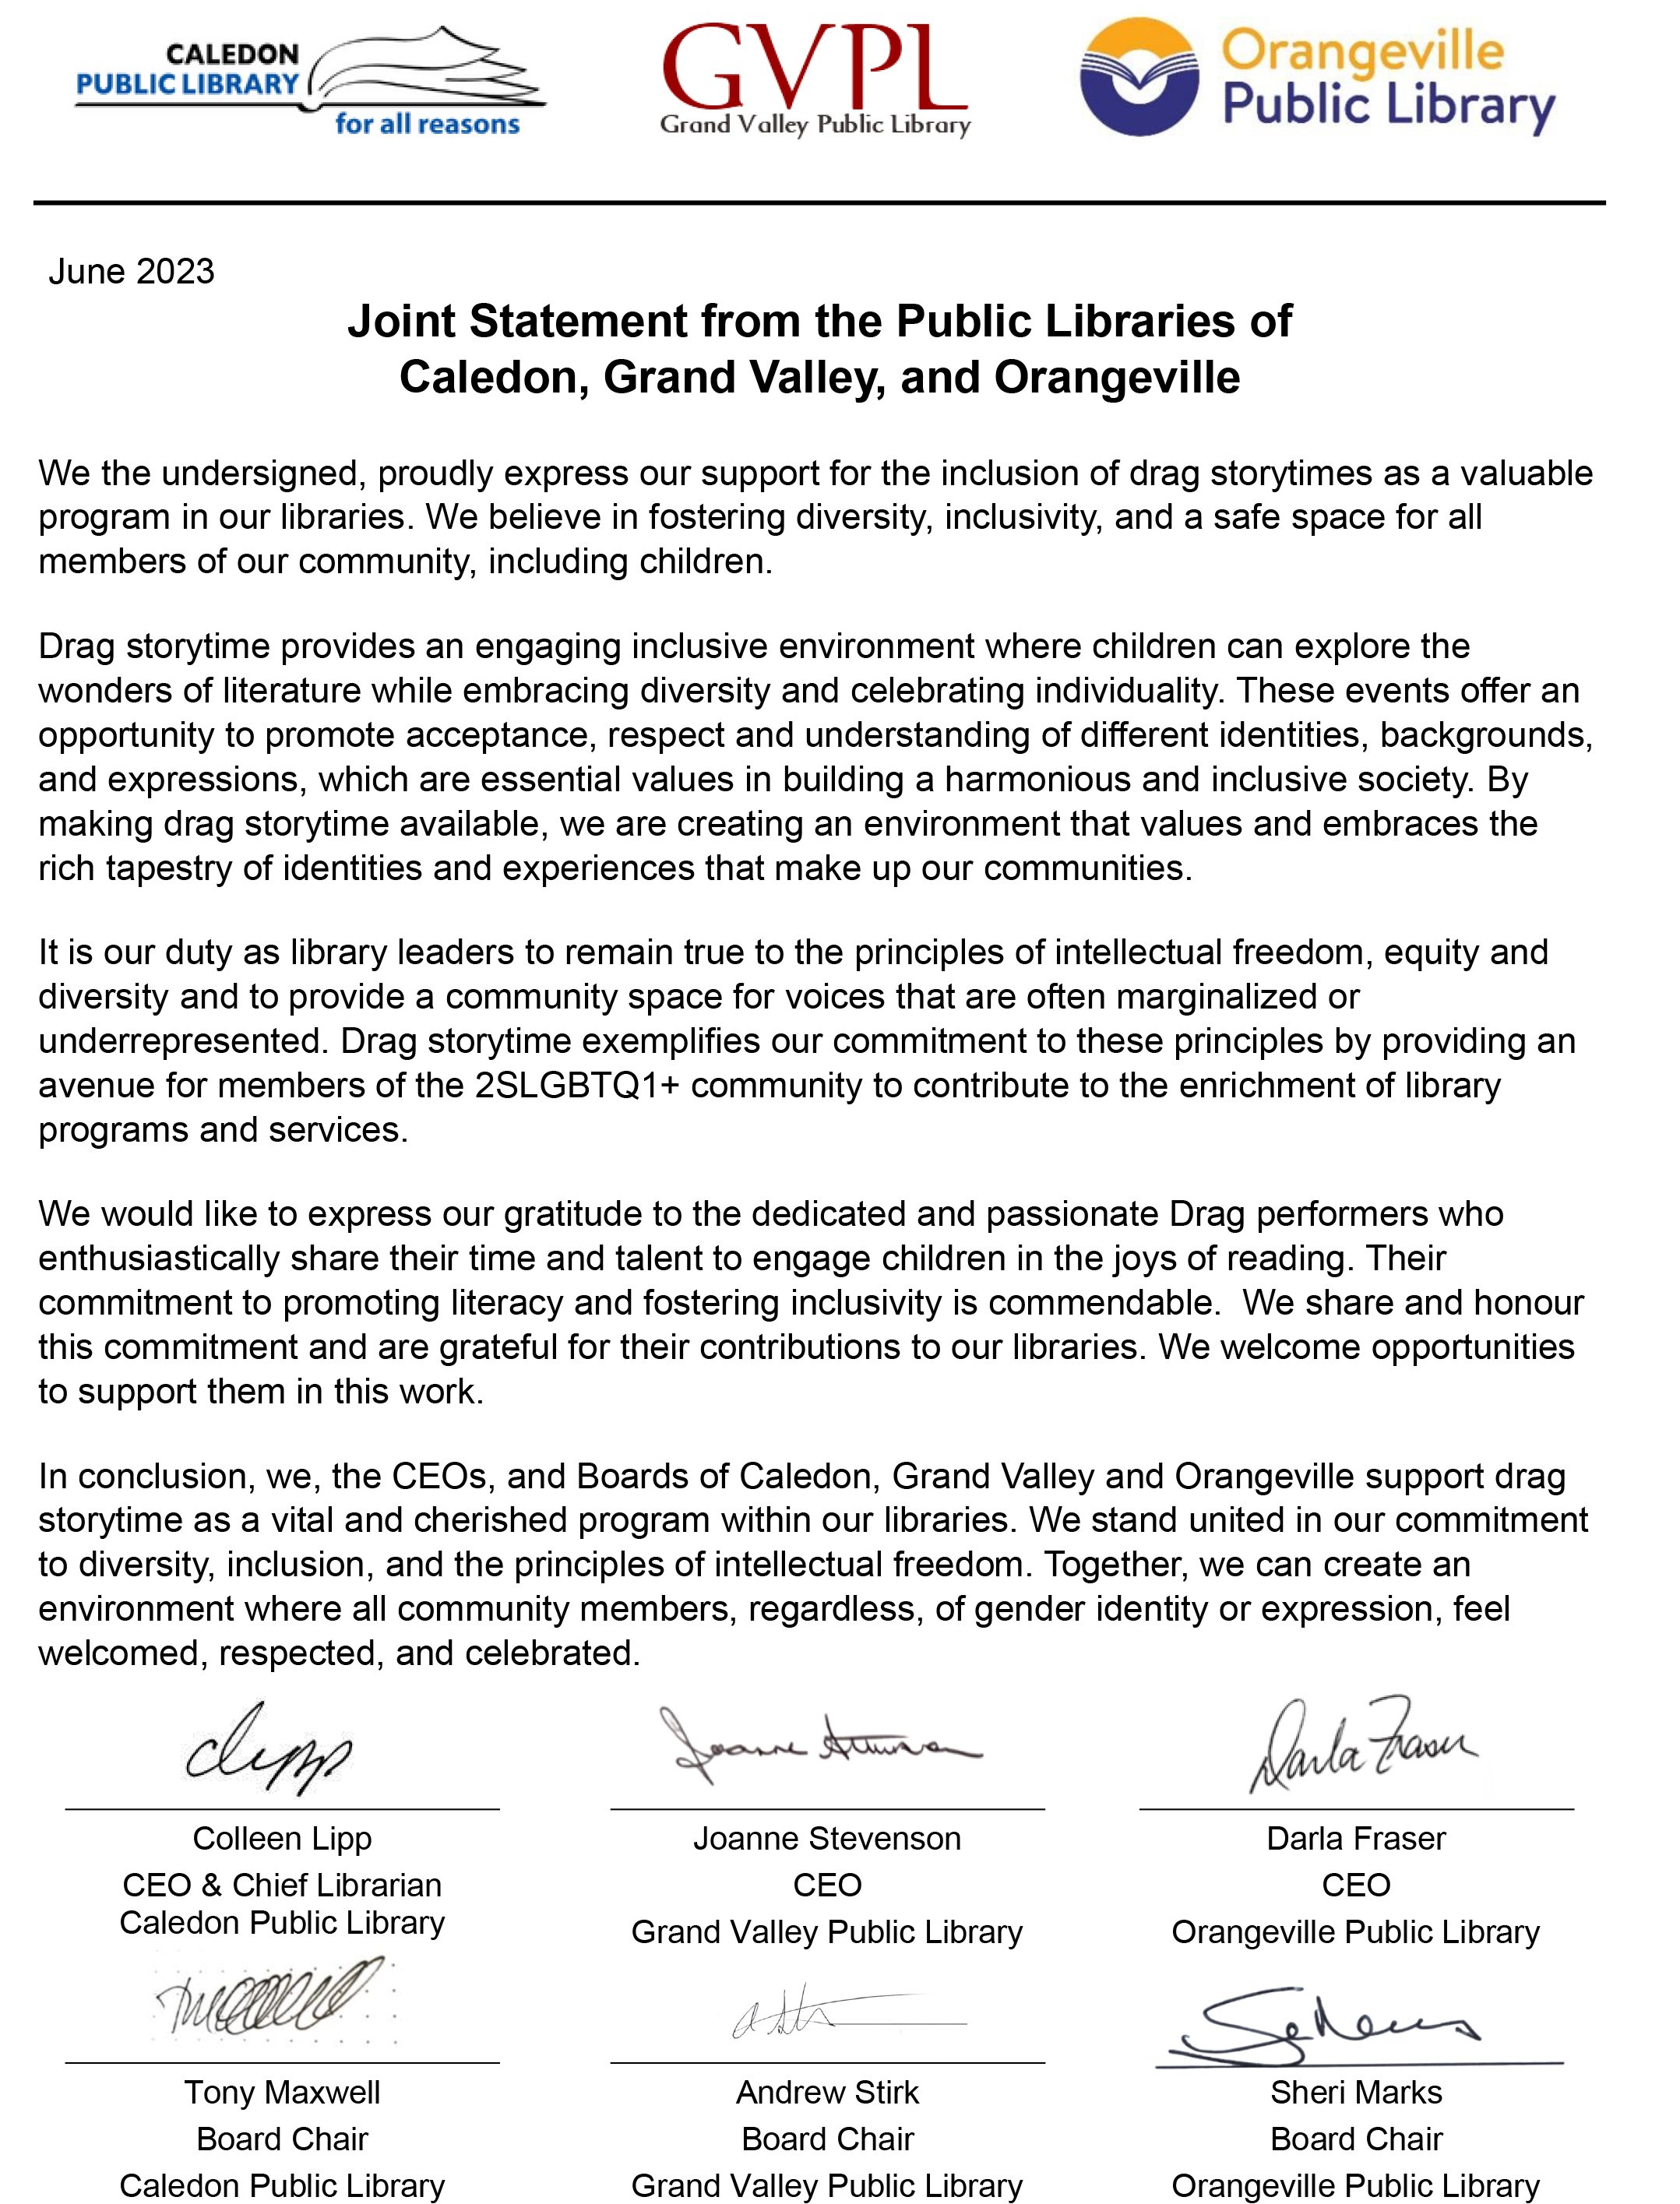 A copy of the above press release with signatures from library CEO's and board chairs